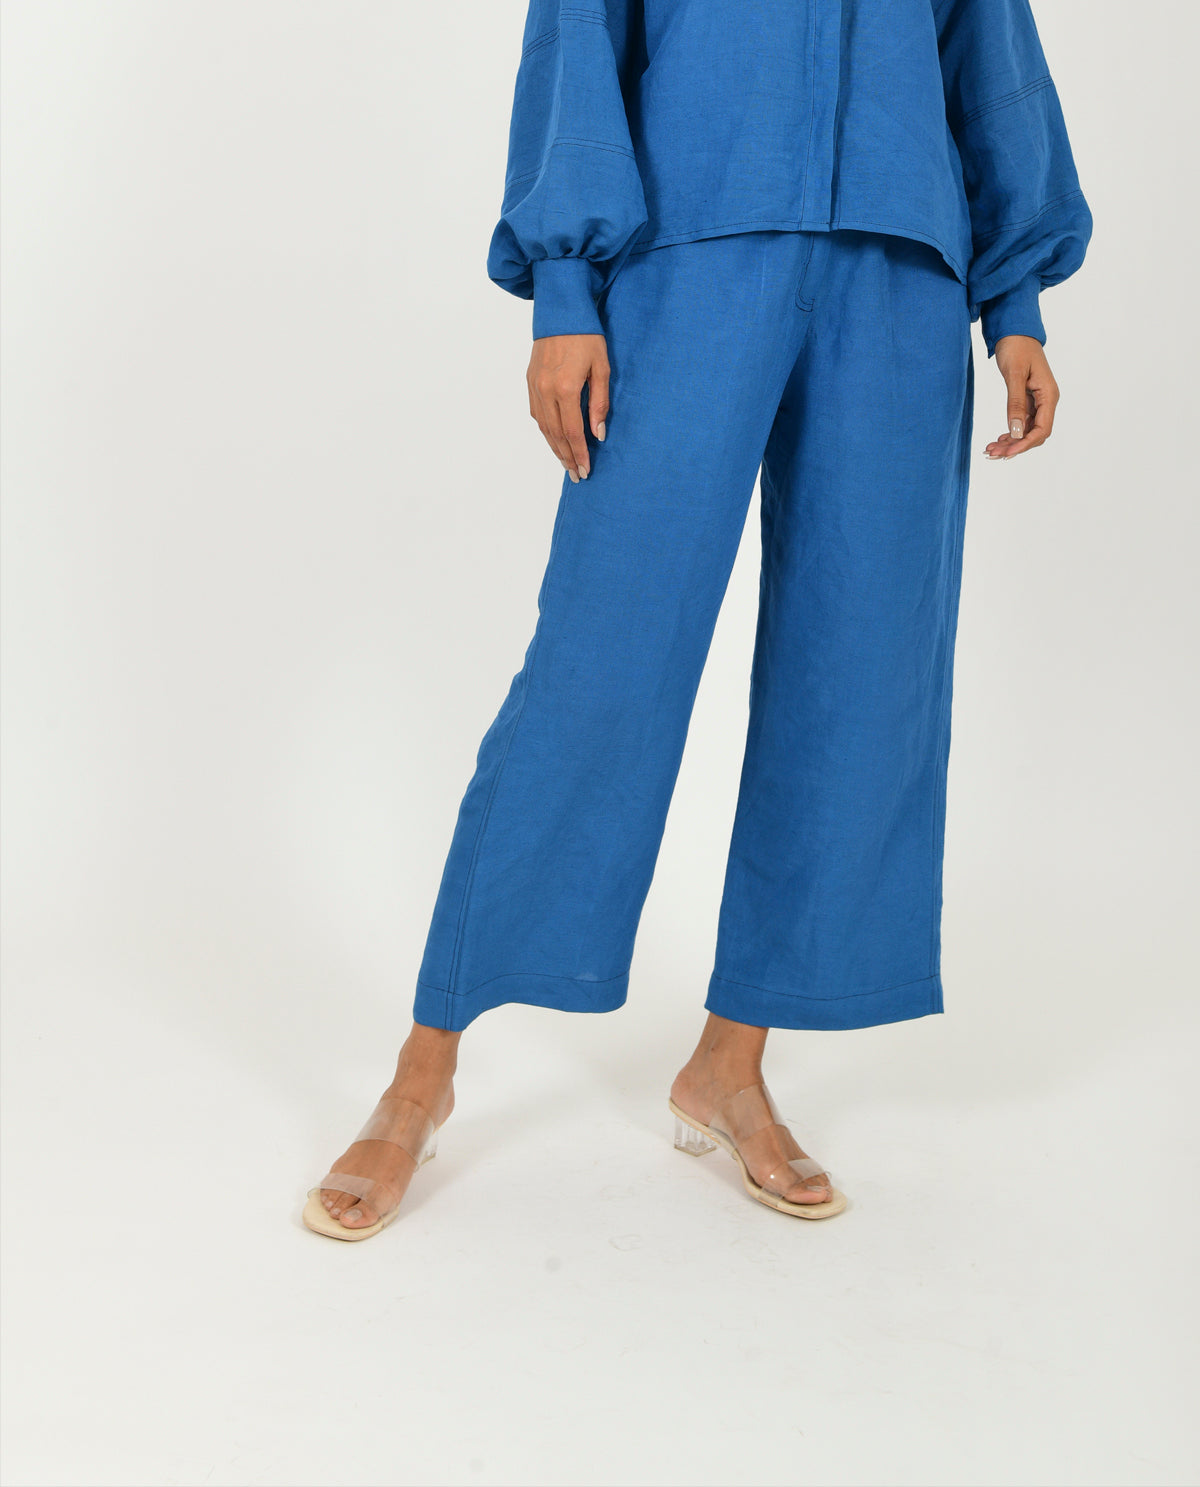 Blue Linen Pants by Rias Jaipur with Blue, Casual Wear, Linen Blend, Natural, Pants, Relaxed Fit, Solids, Womenswear, Yaadein, Yaadein by Rias Jaipur at Kamakhyaa for sustainable fashion